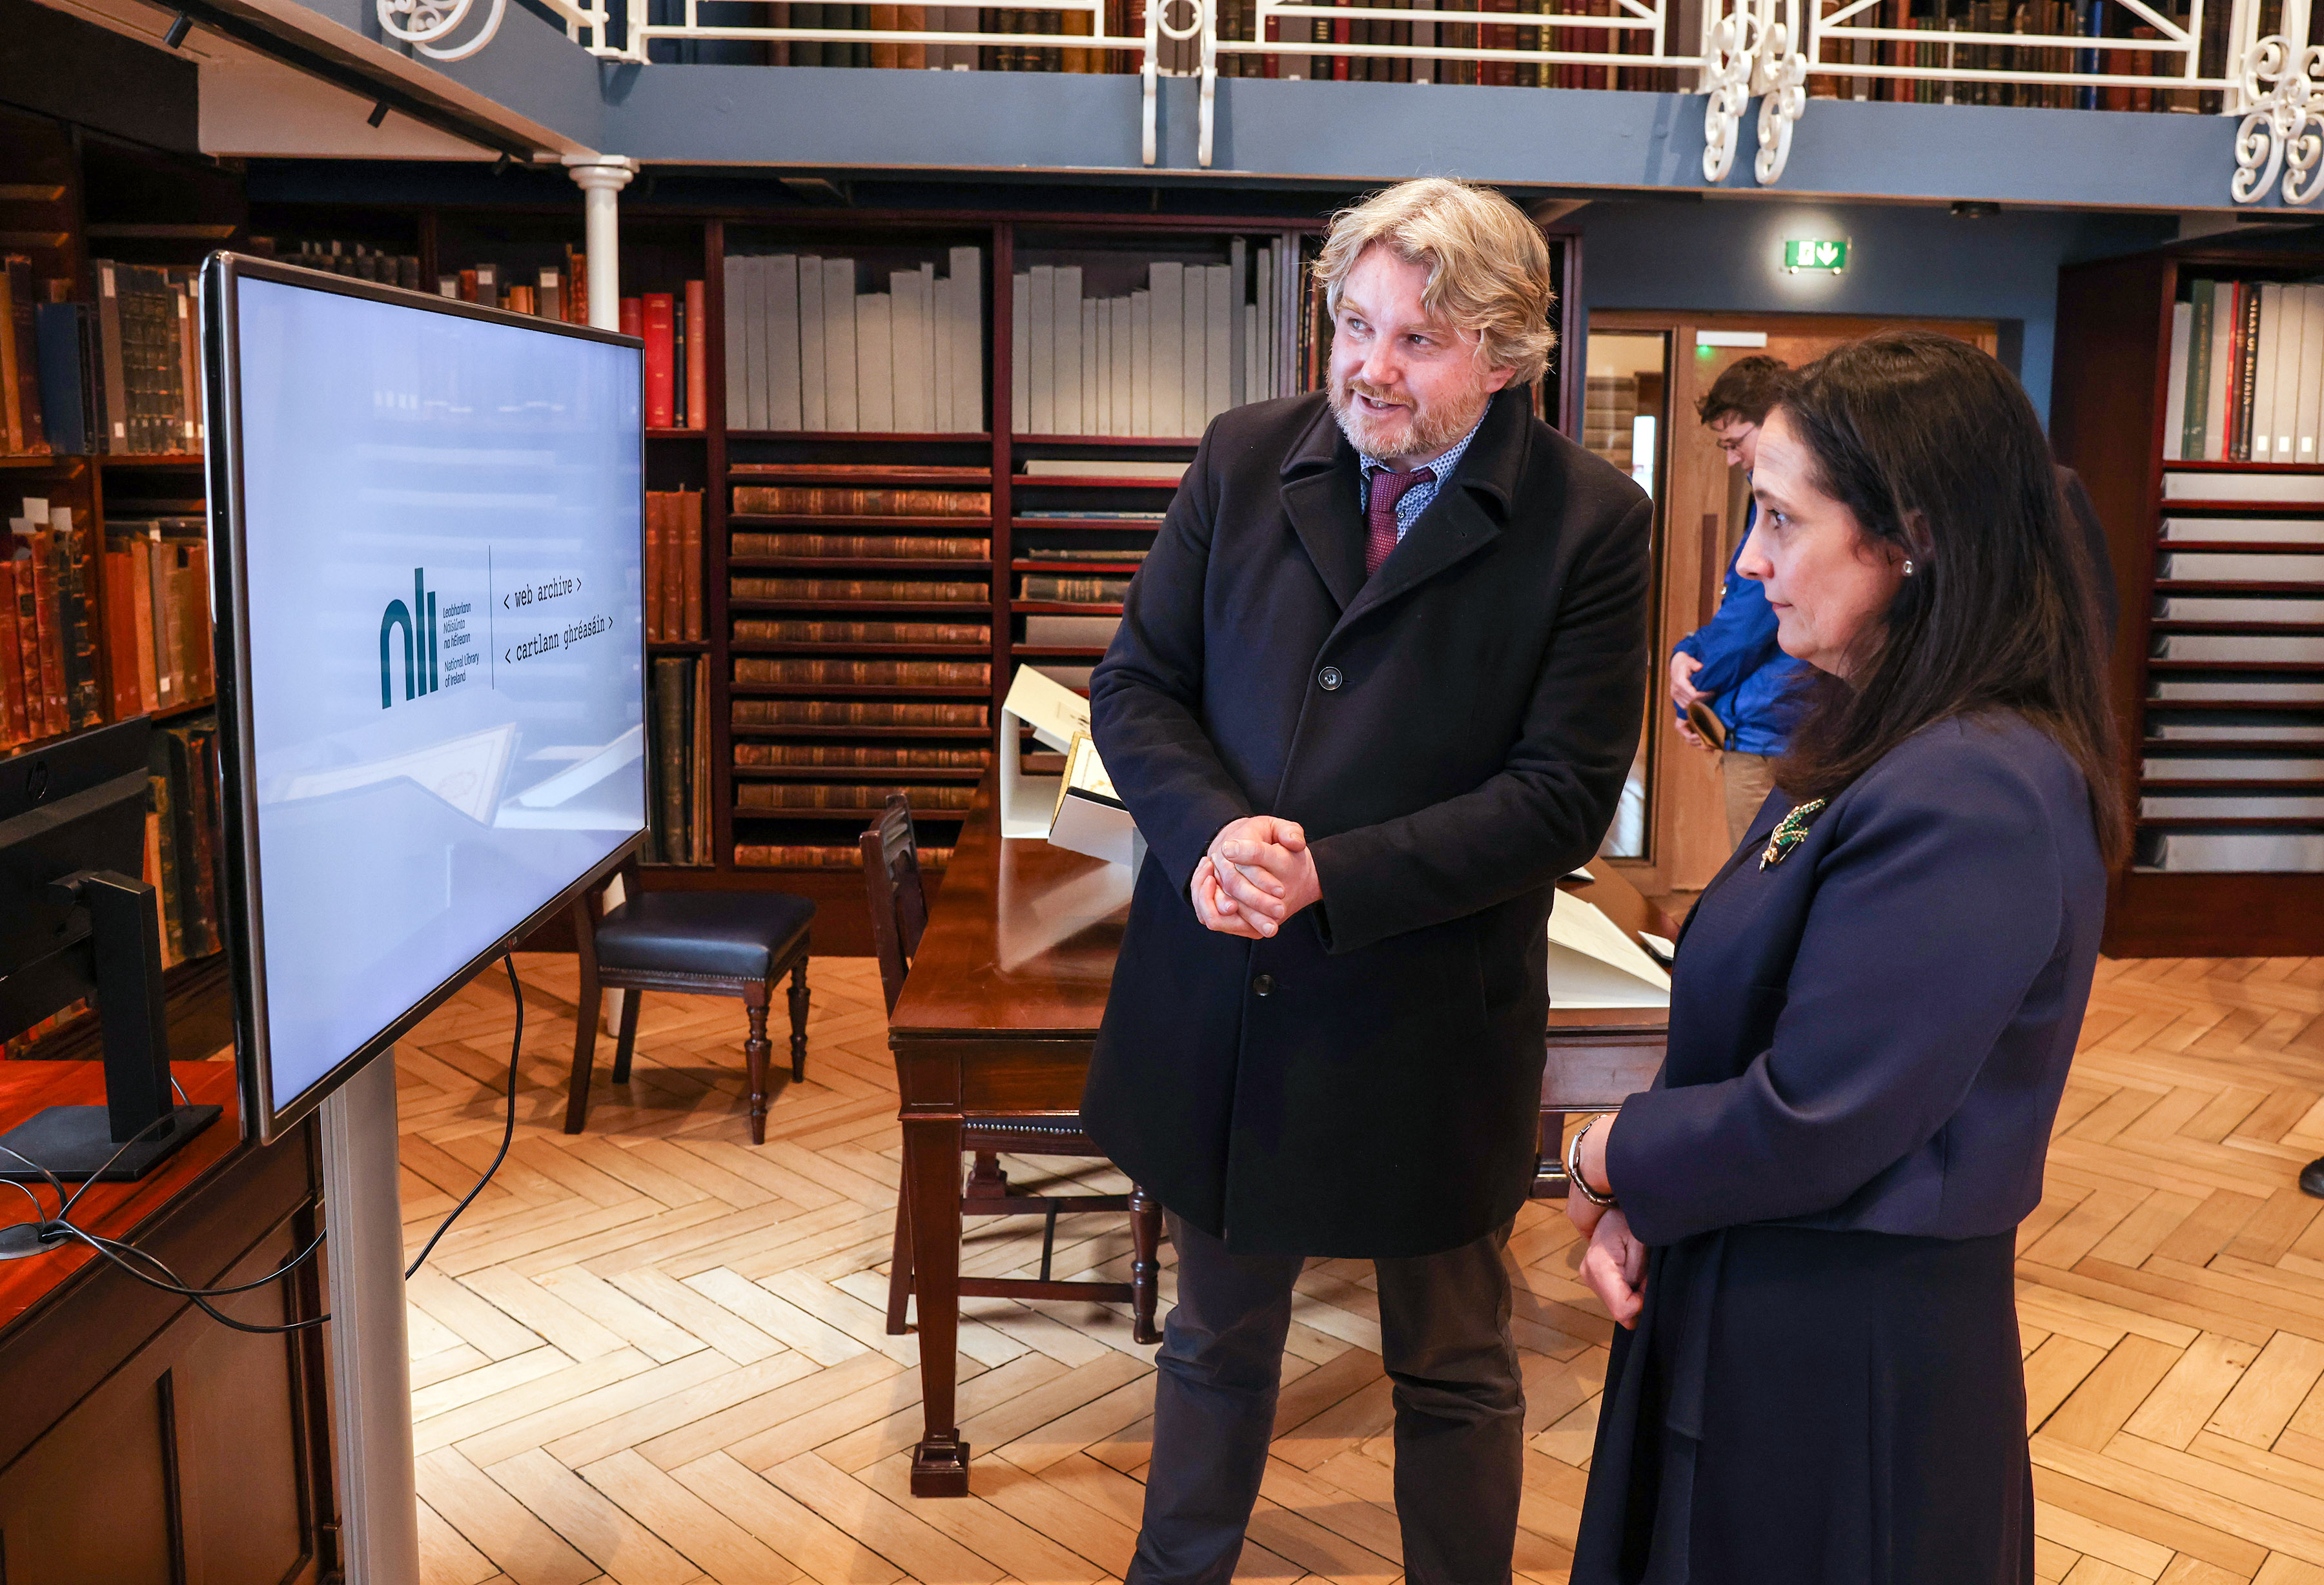 Head of Digital Collections, Eoghan Ó Carragáin shares the NLI Web Archive project with Minister Martin.